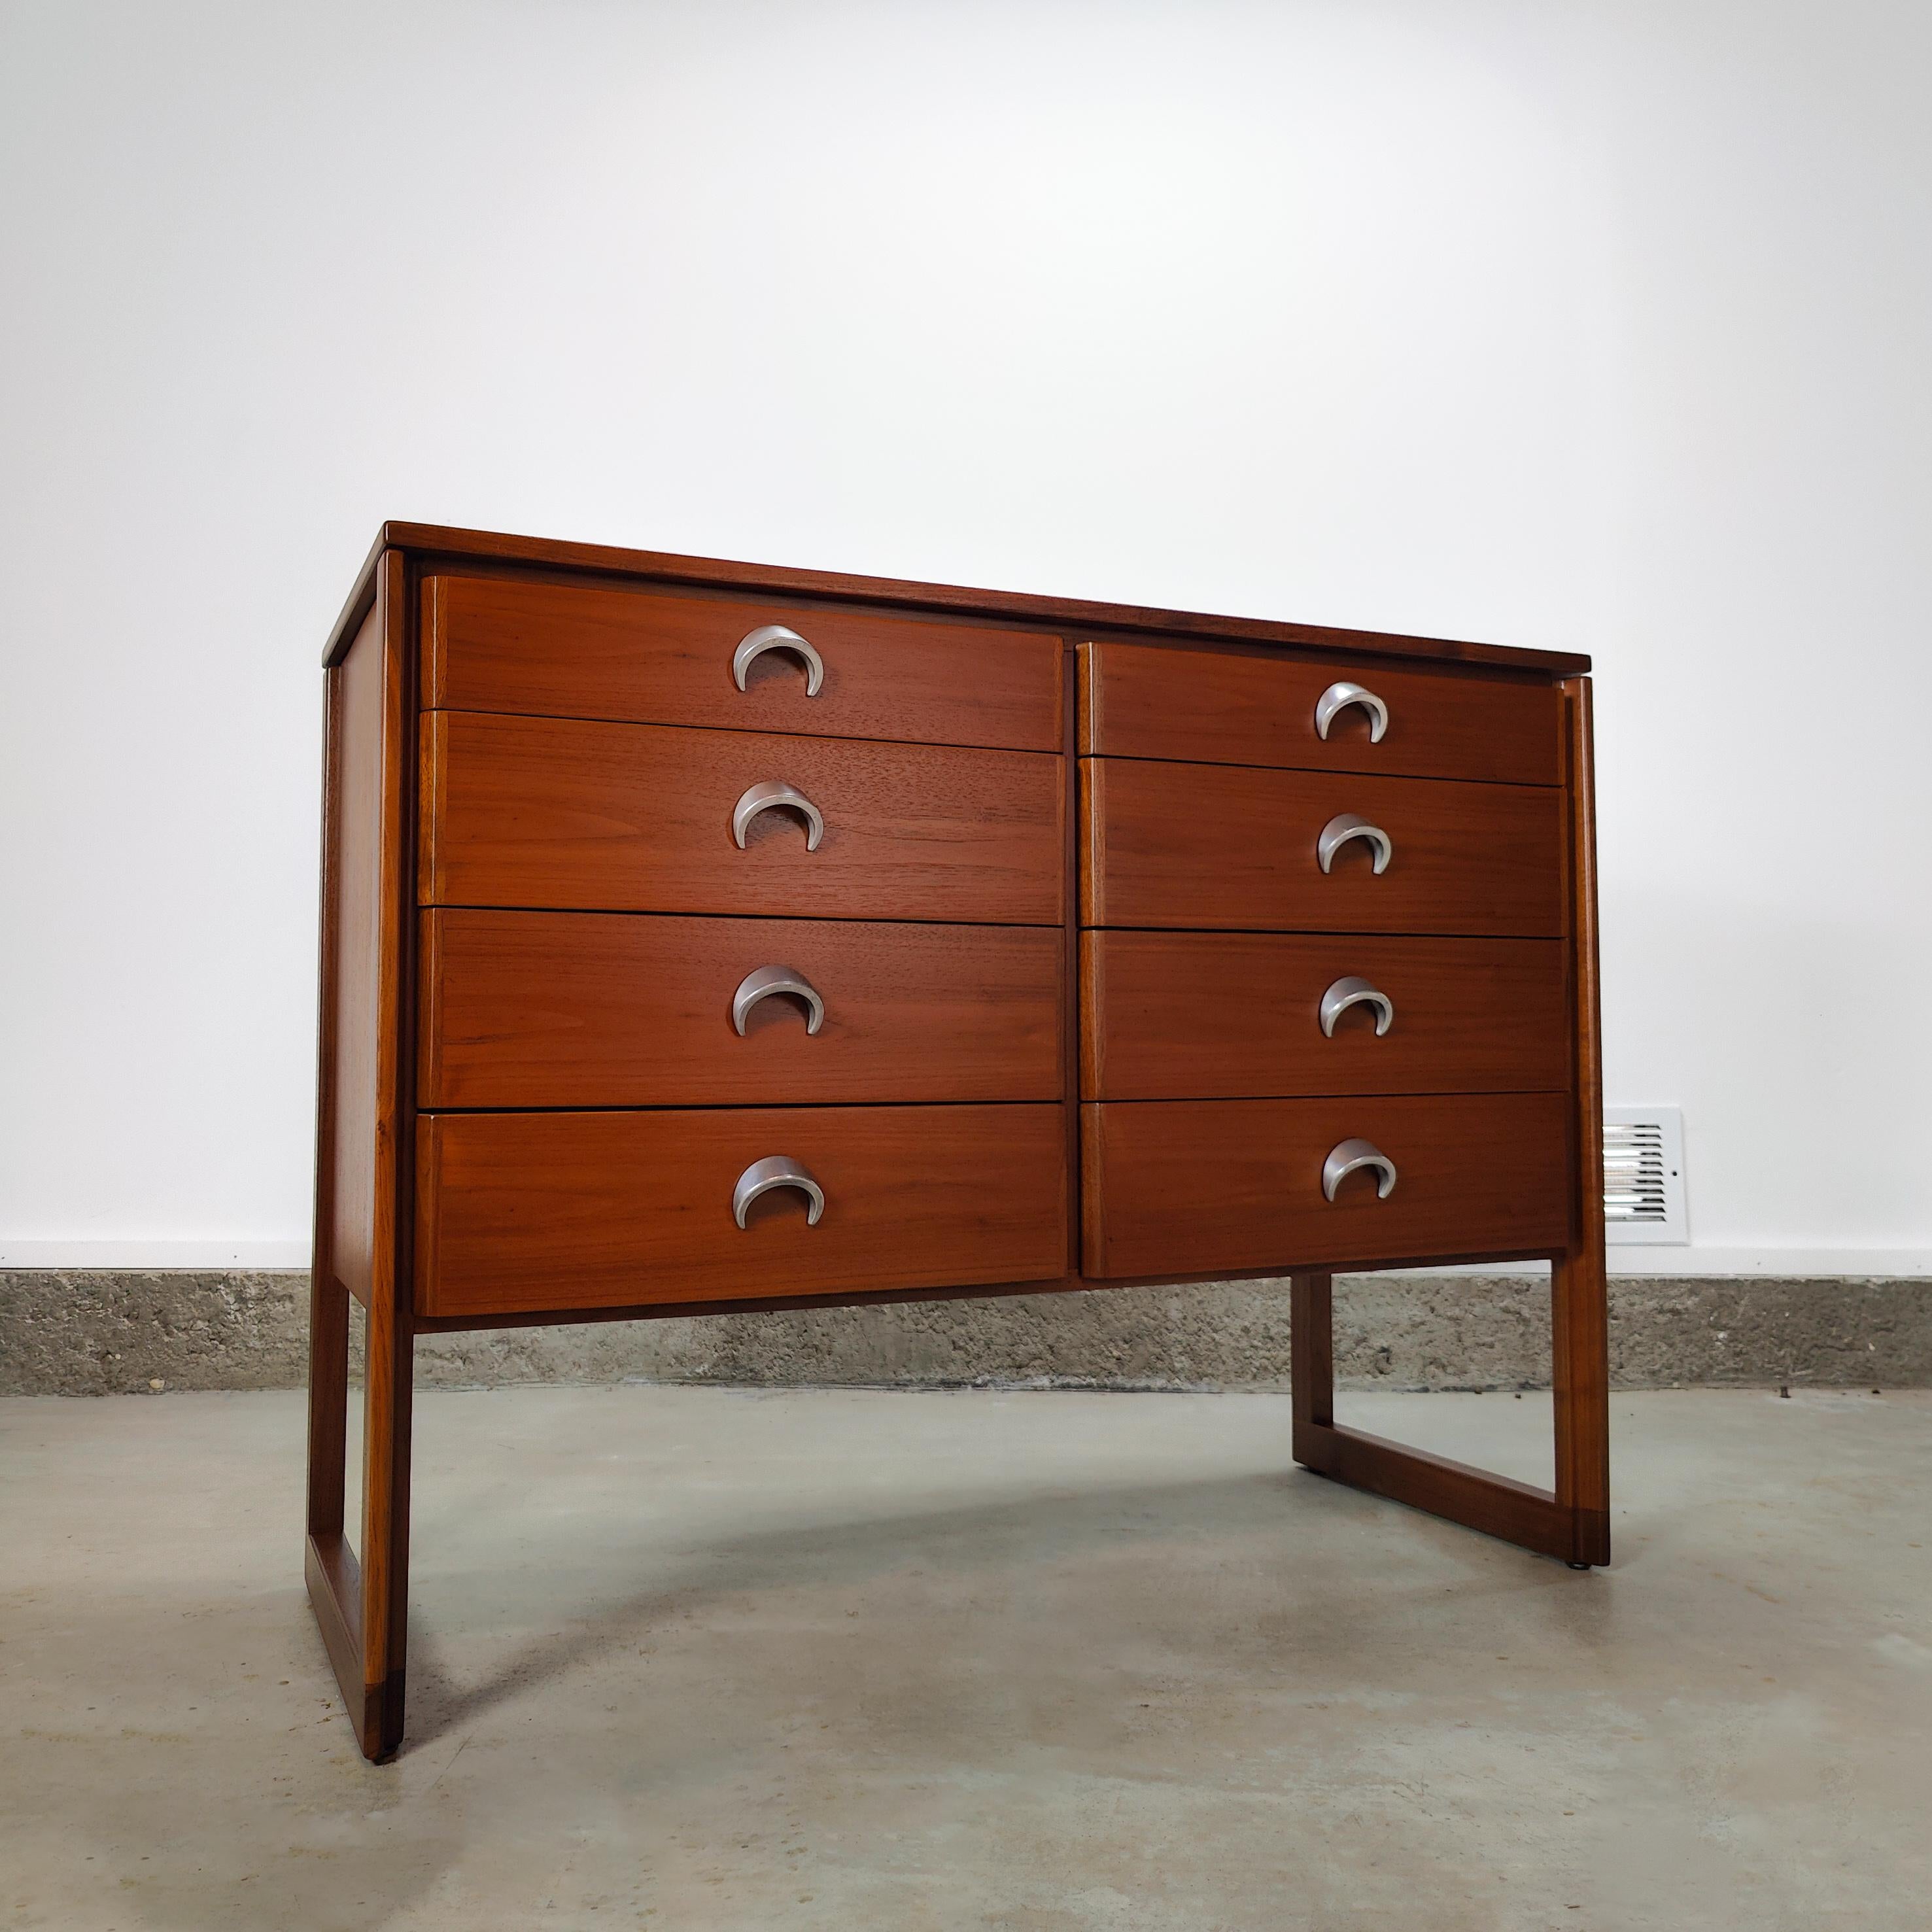 Just in - a spectacular & rare case piece by American designer and icon, Jens Risom. Features a walnut frame that sit pretty on a sled base with walnut drawer fronts & concave pulls. Retains original plaque. Perfect for that classic clean lined look